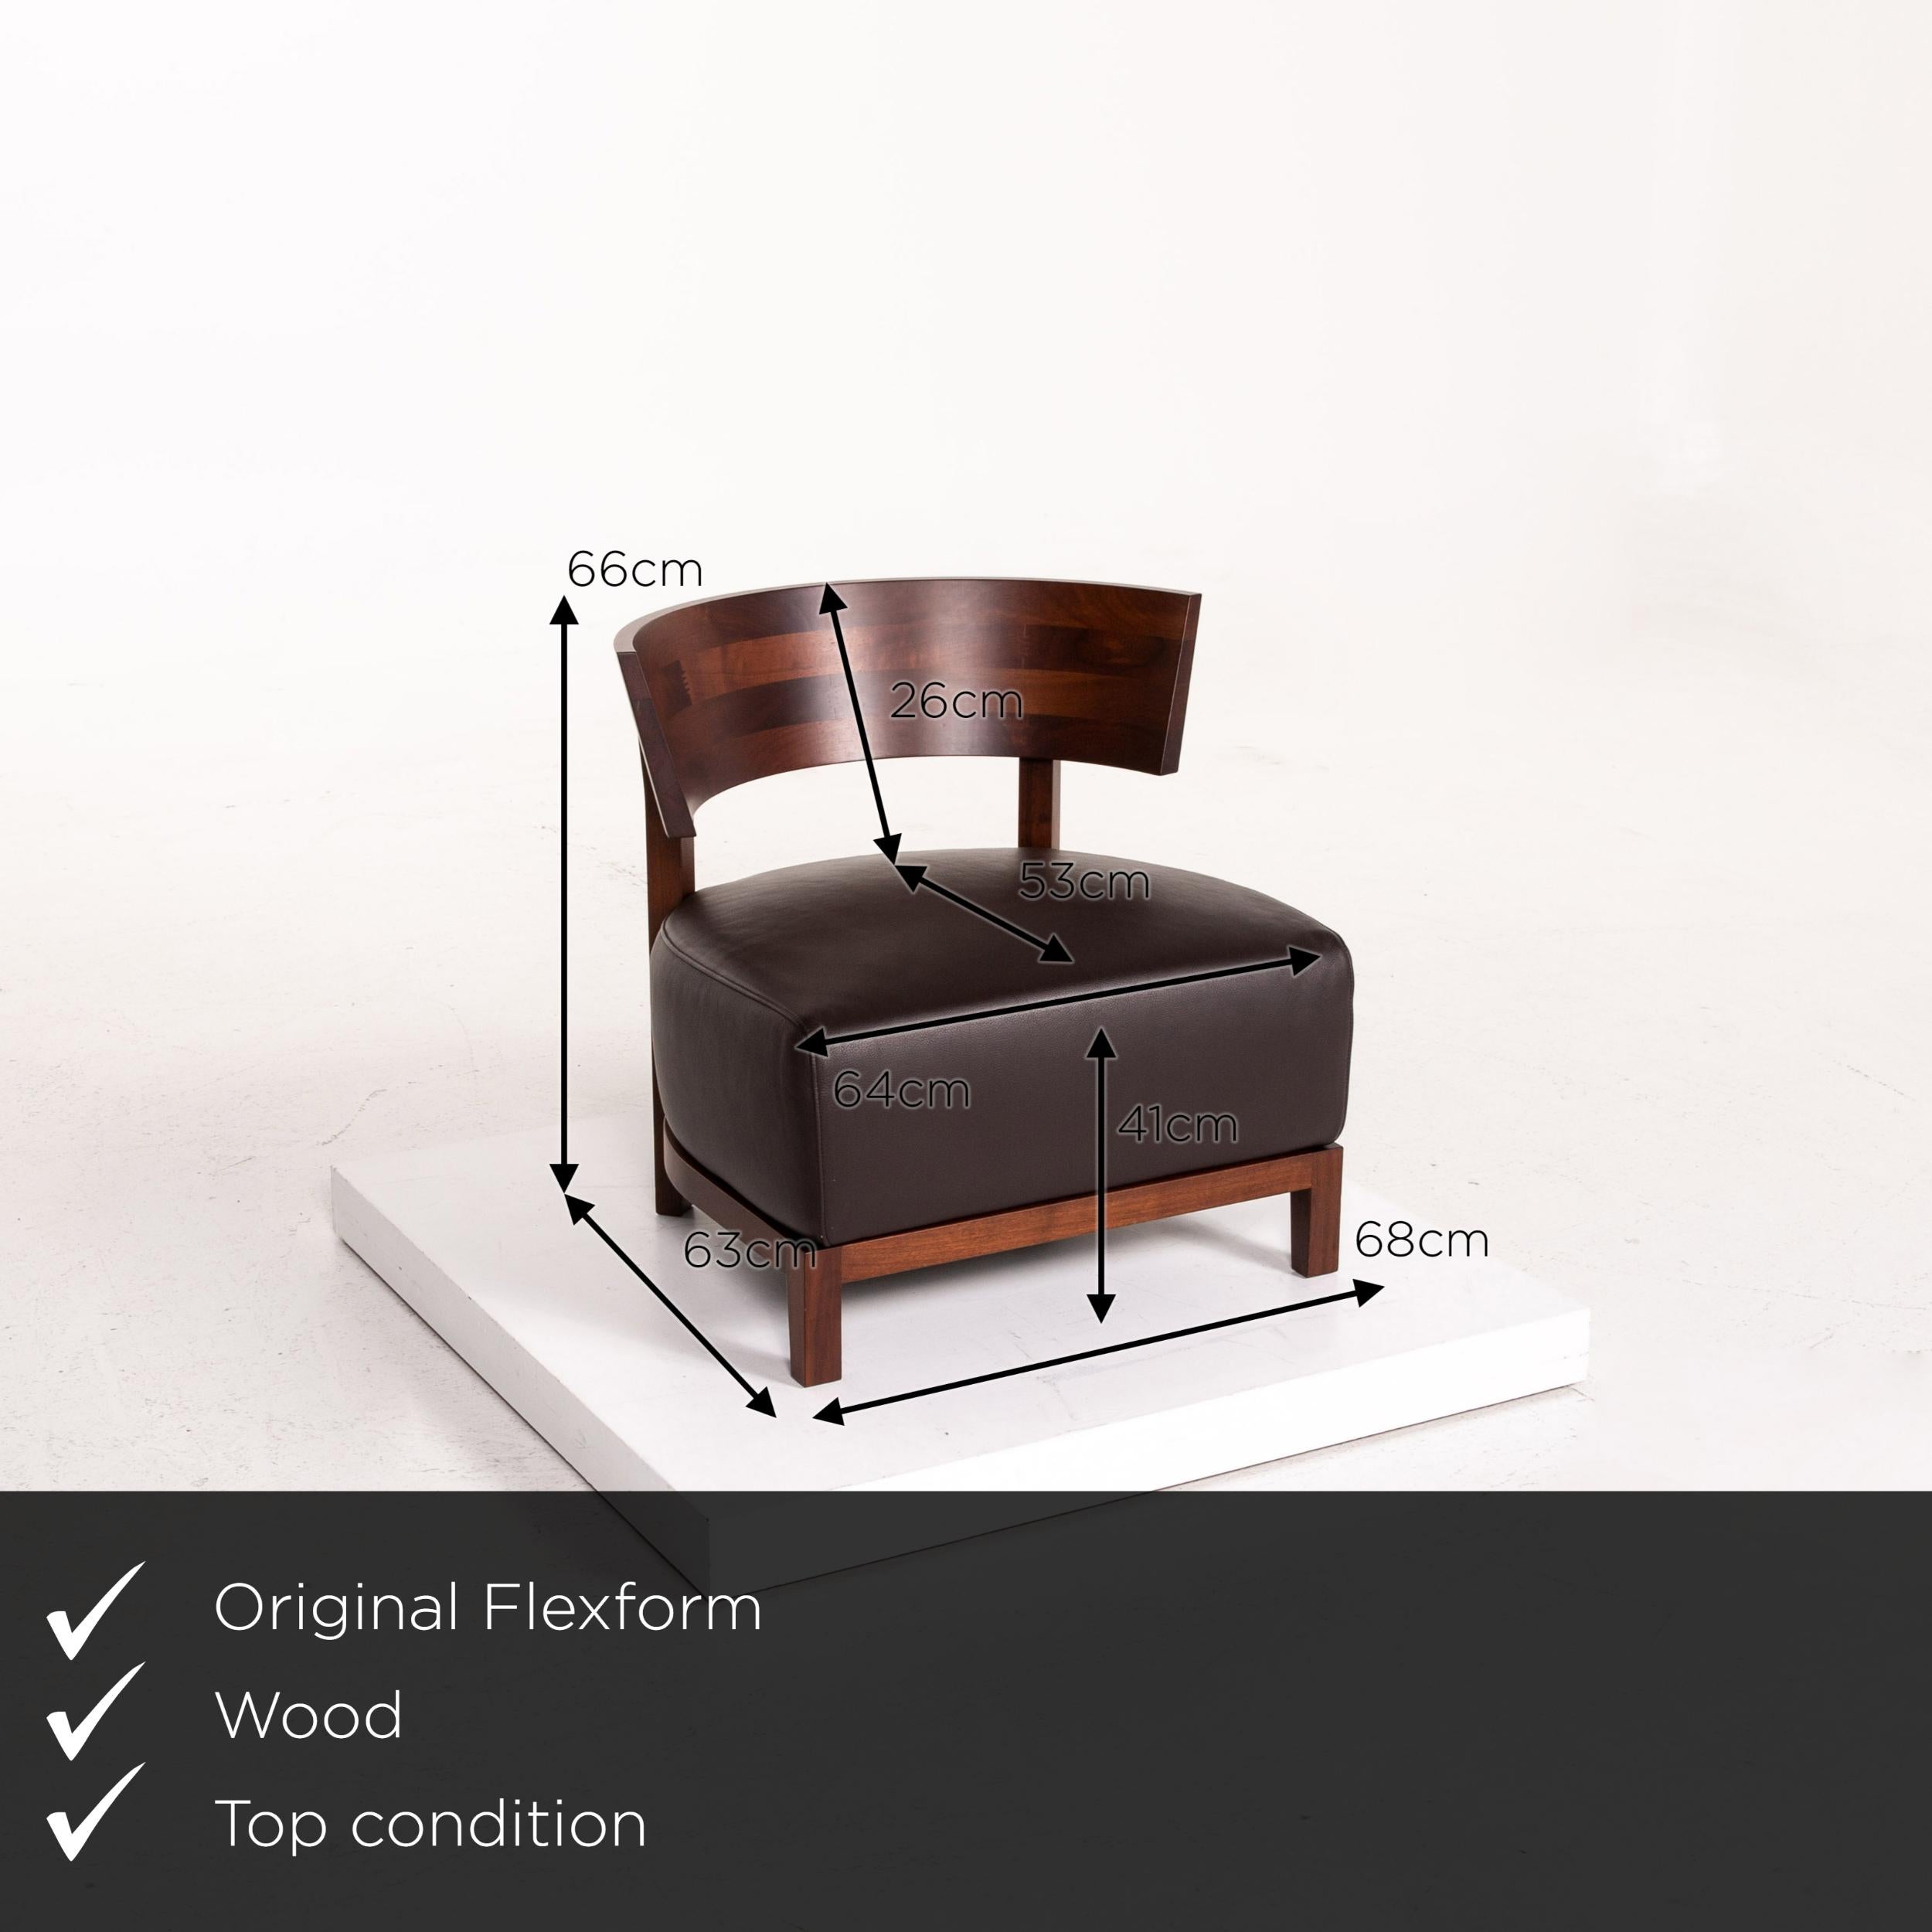 We present to you a Flexform Thomas wood leather armchair dark brown Antonio Citterio chair.

Product measurements in centimeters:

Depth 63
Width 68
Height 66
Seat height 41
Rest height 66
Seat depth 53
Seat width 64
Back height